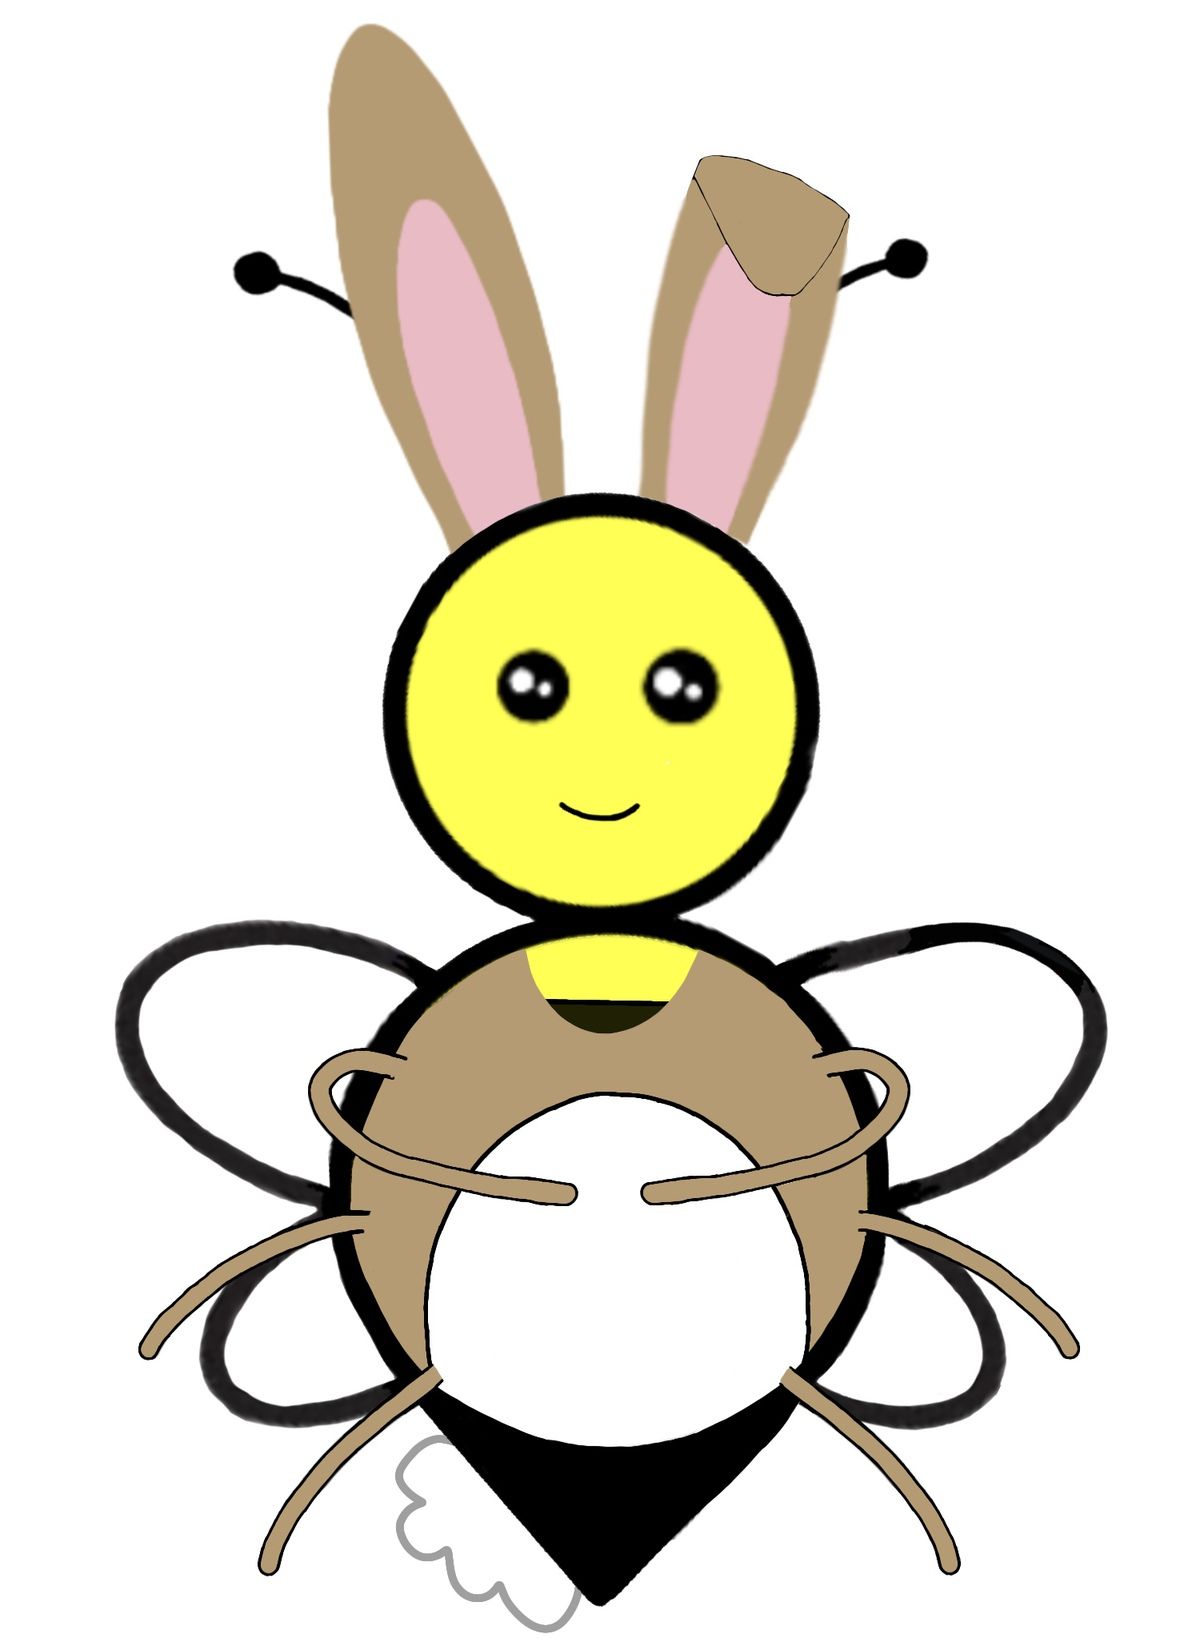 Bee in a bunny suit